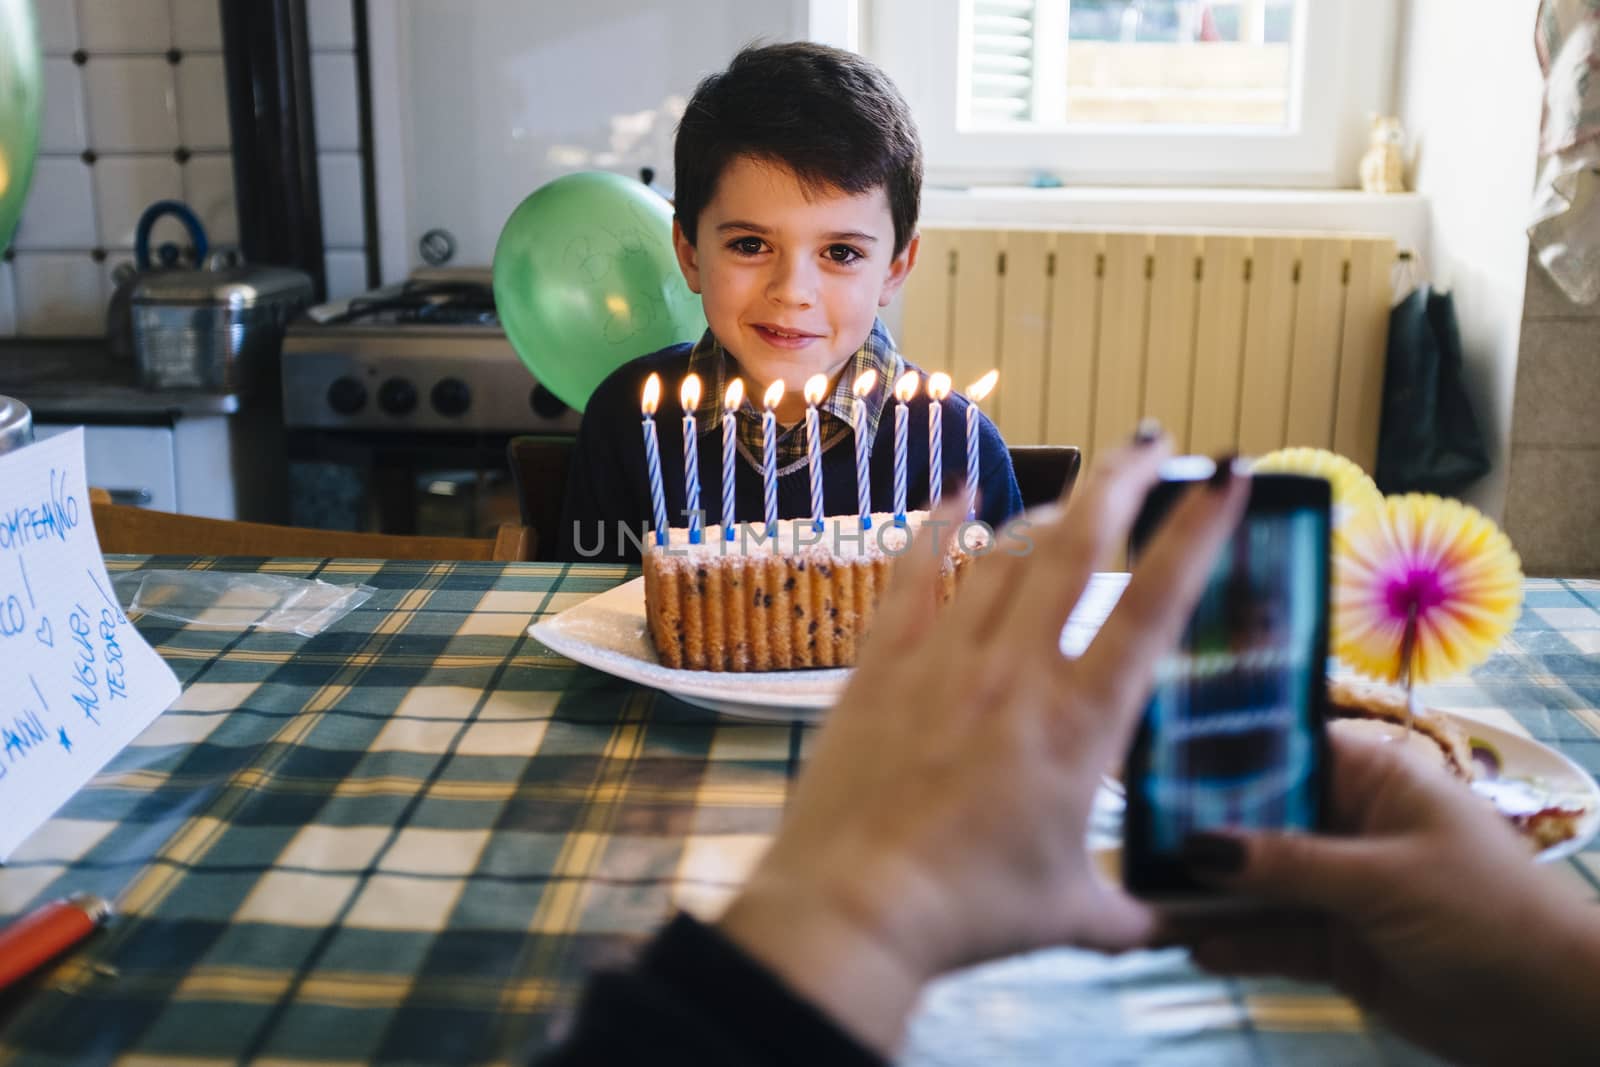 baby on the day of his ninth birthday blowing the candles on the cake, in the kitchen of his home, his mother films him with a smartphone